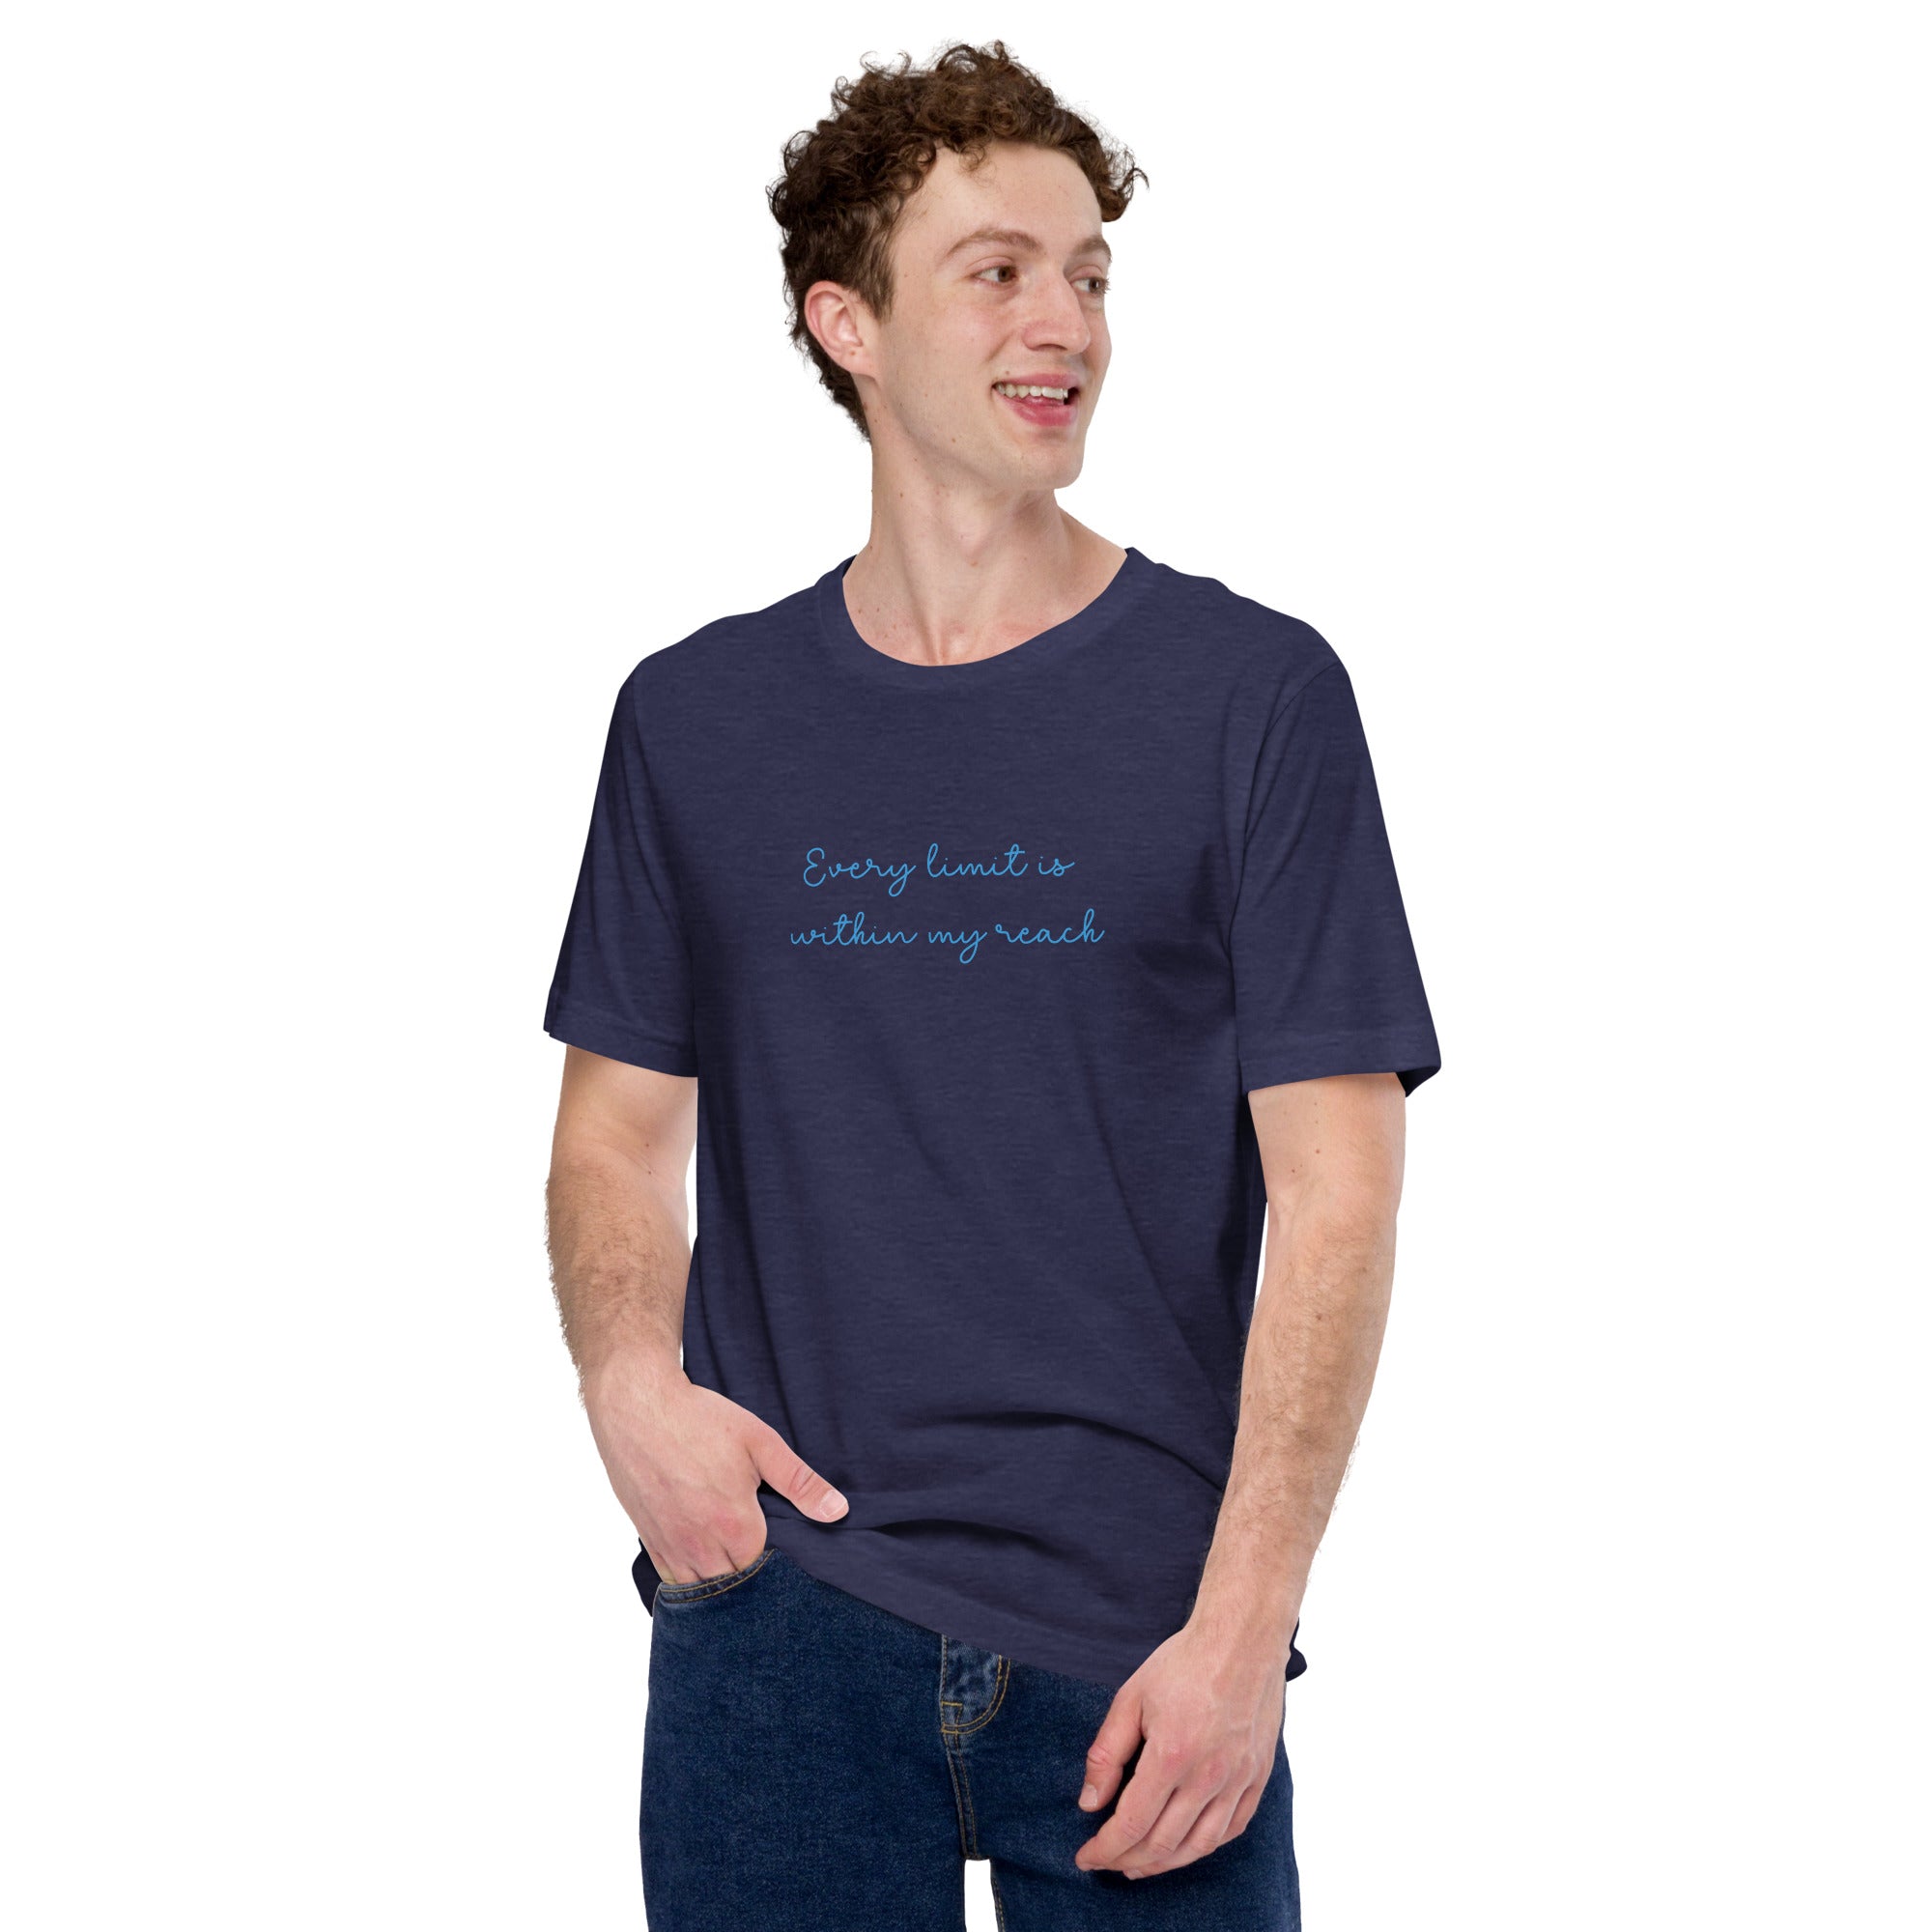 Every Limit In Your Reach Premium Short-Sleeve Unisex T-Shirt | Positive Affirmation Tee